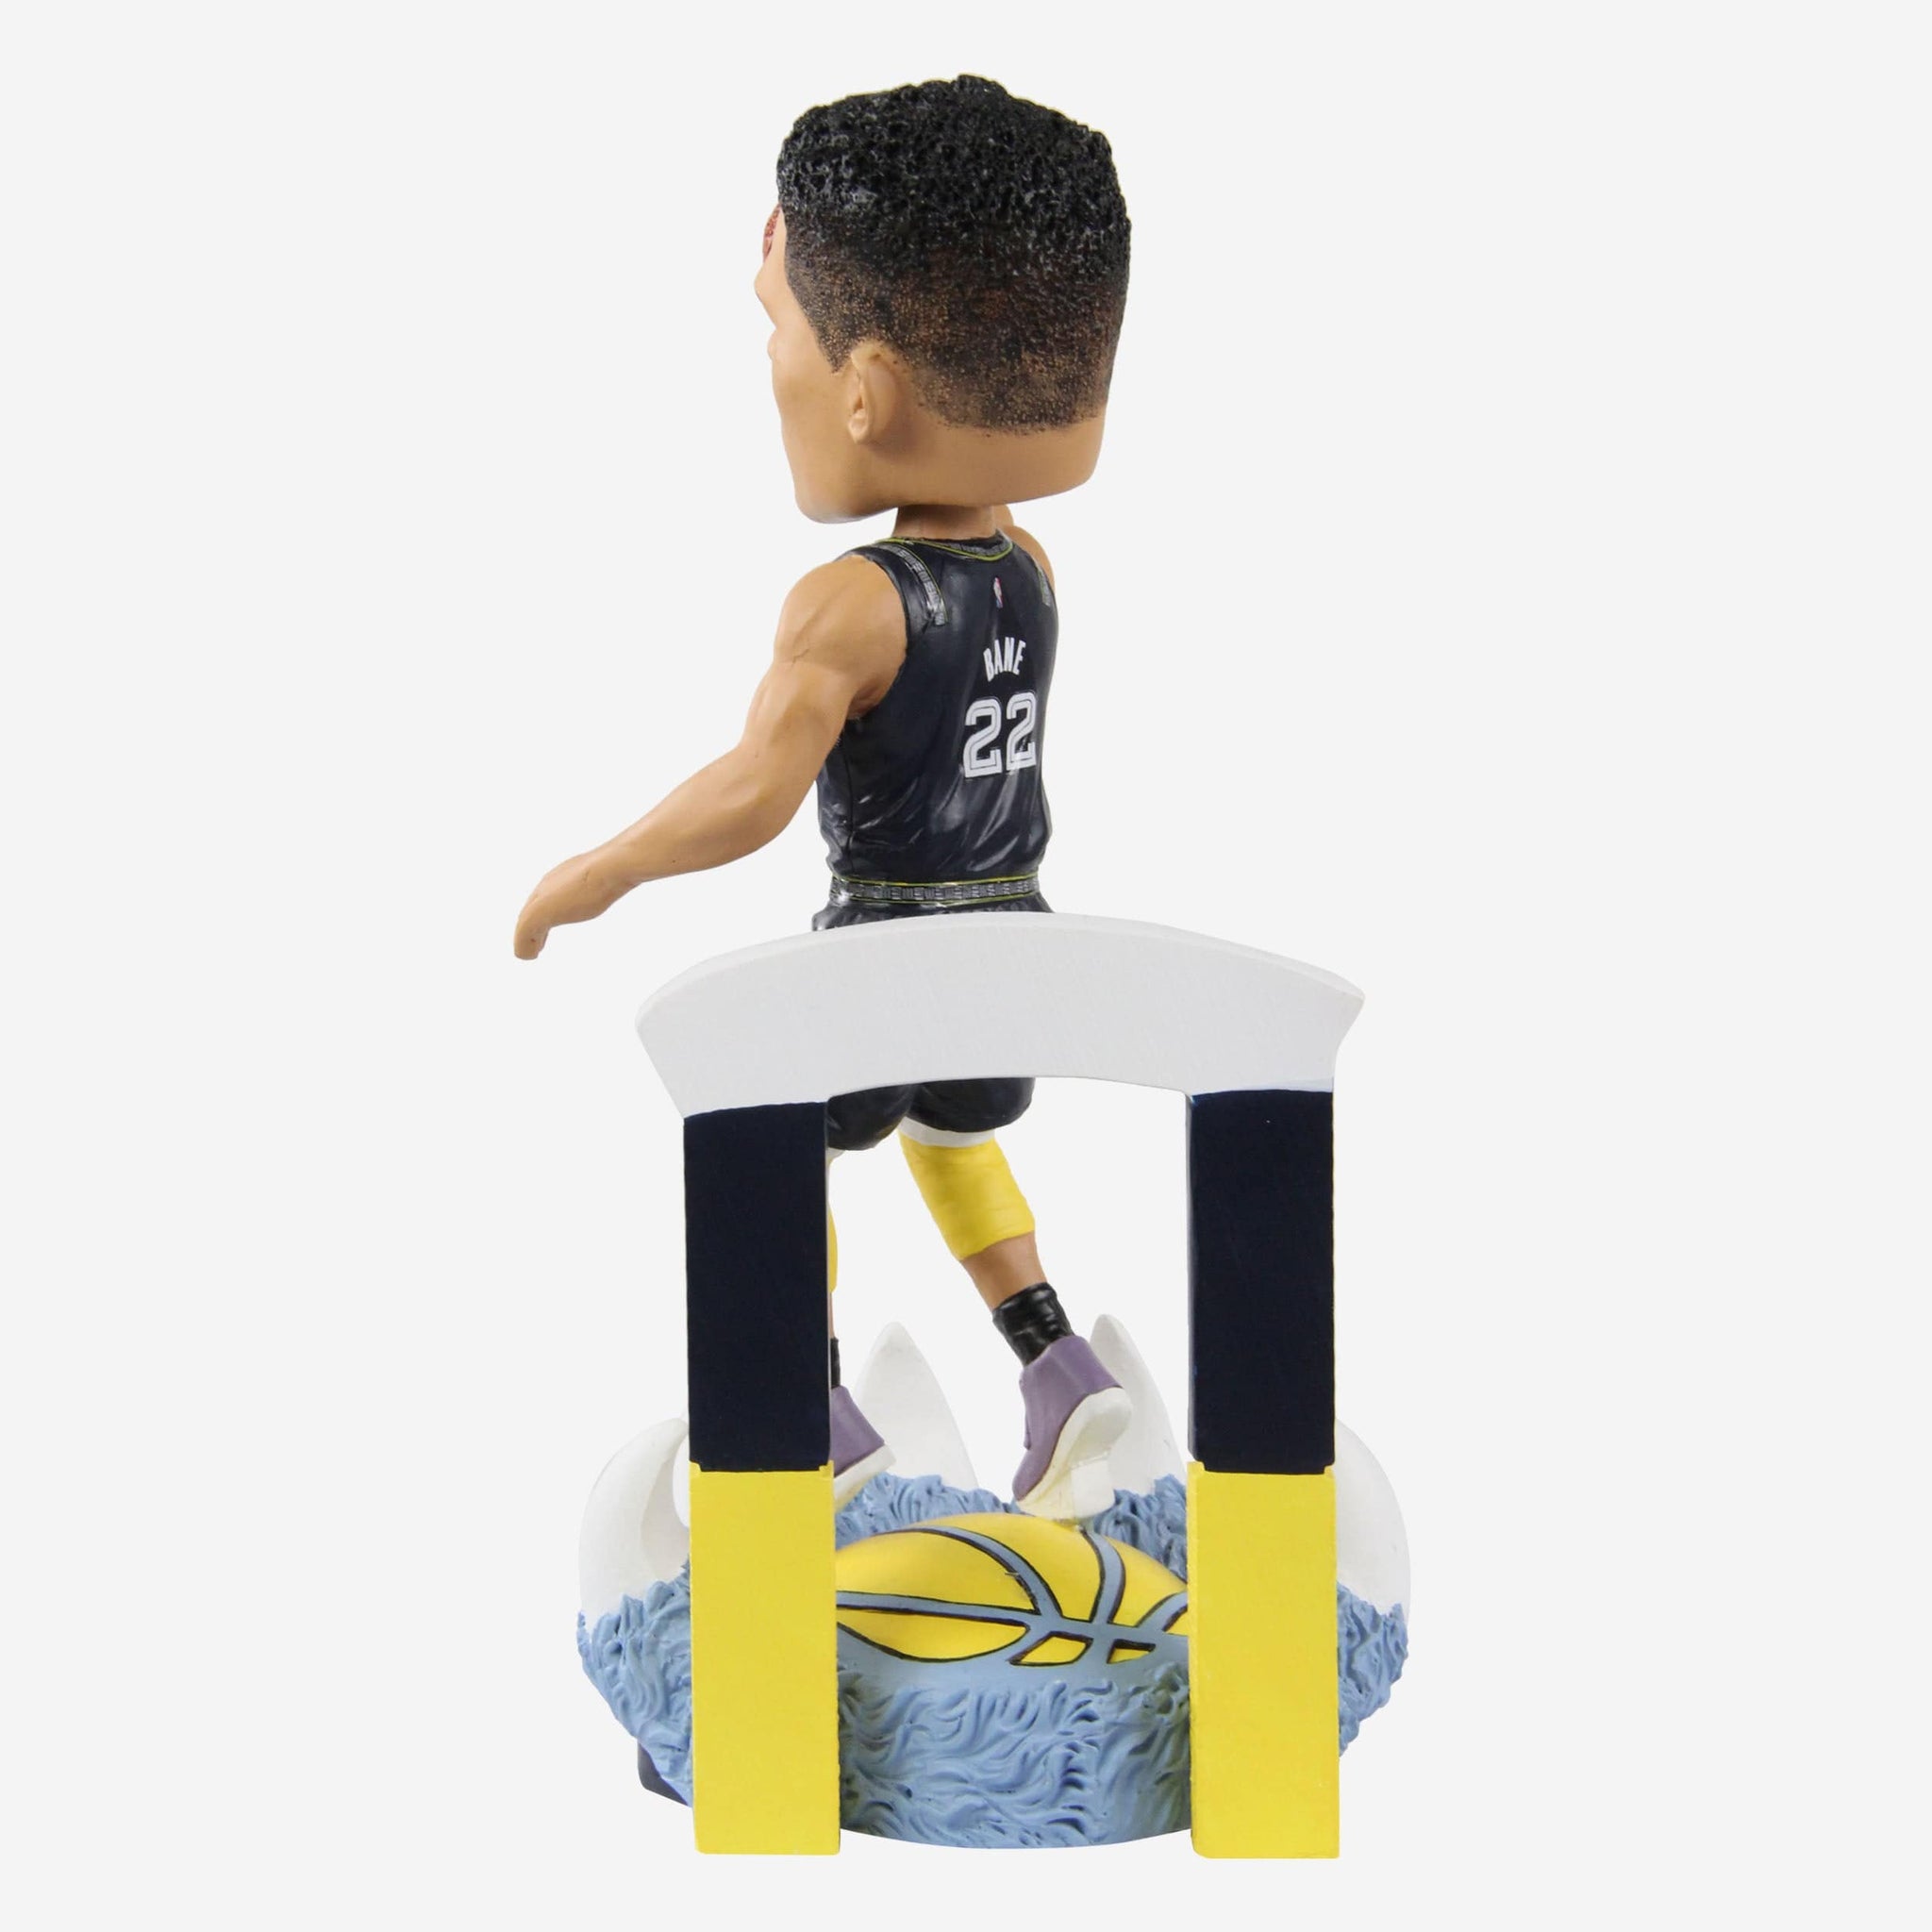 Desmond Bane Memphis Grizzlies 2022 City Jersey Bobblehead Officially Licensed by NBA